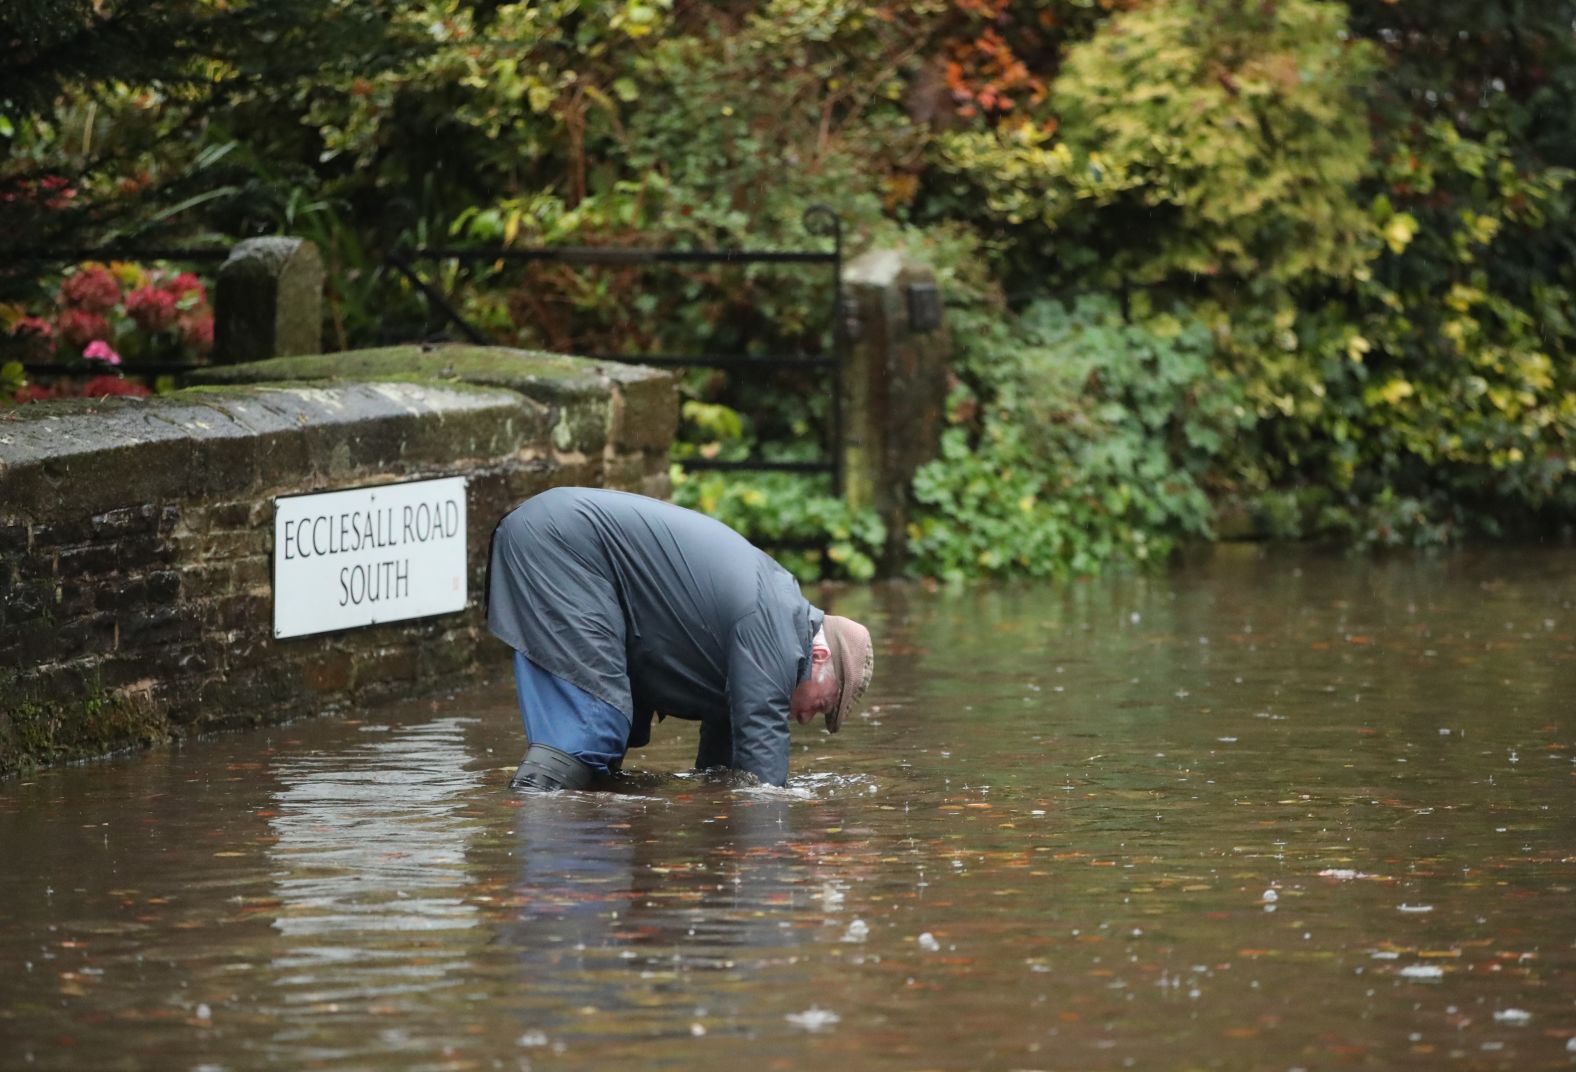 A man tries to unblock a drain on a flooded road in Whirlow, Sheffield, after torrential rain in the area on Thursday.